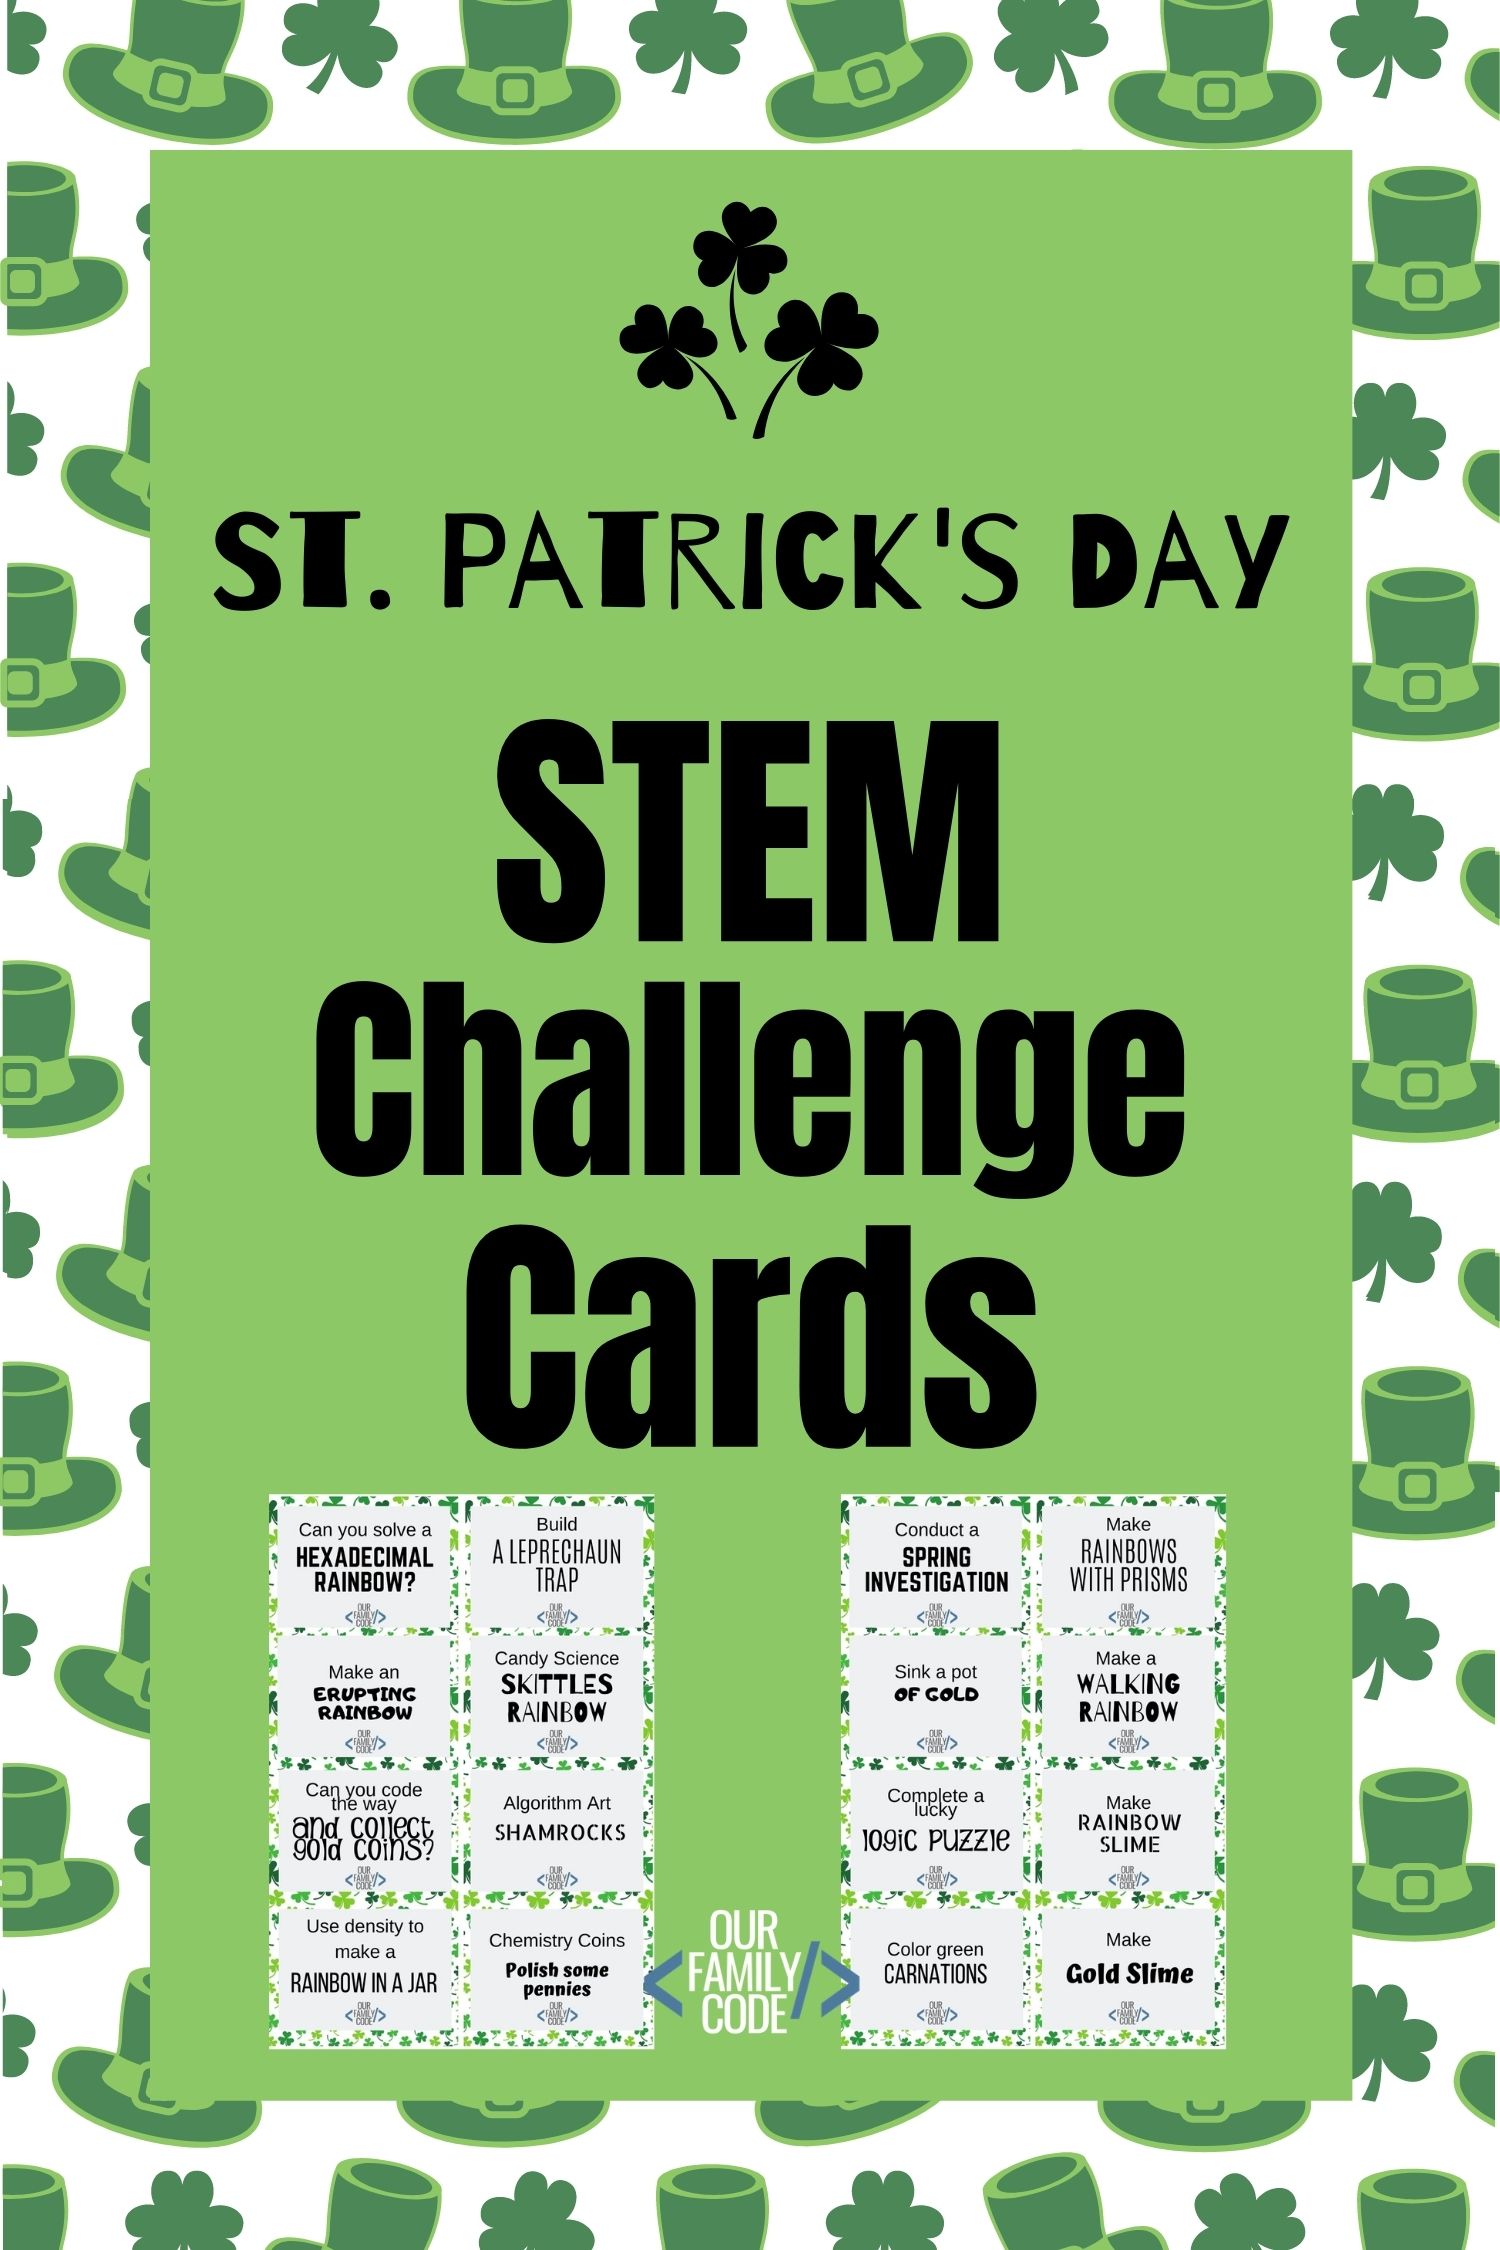 A picture of St. Patrick's Day STEM challenge cards on leprechaun hat background.